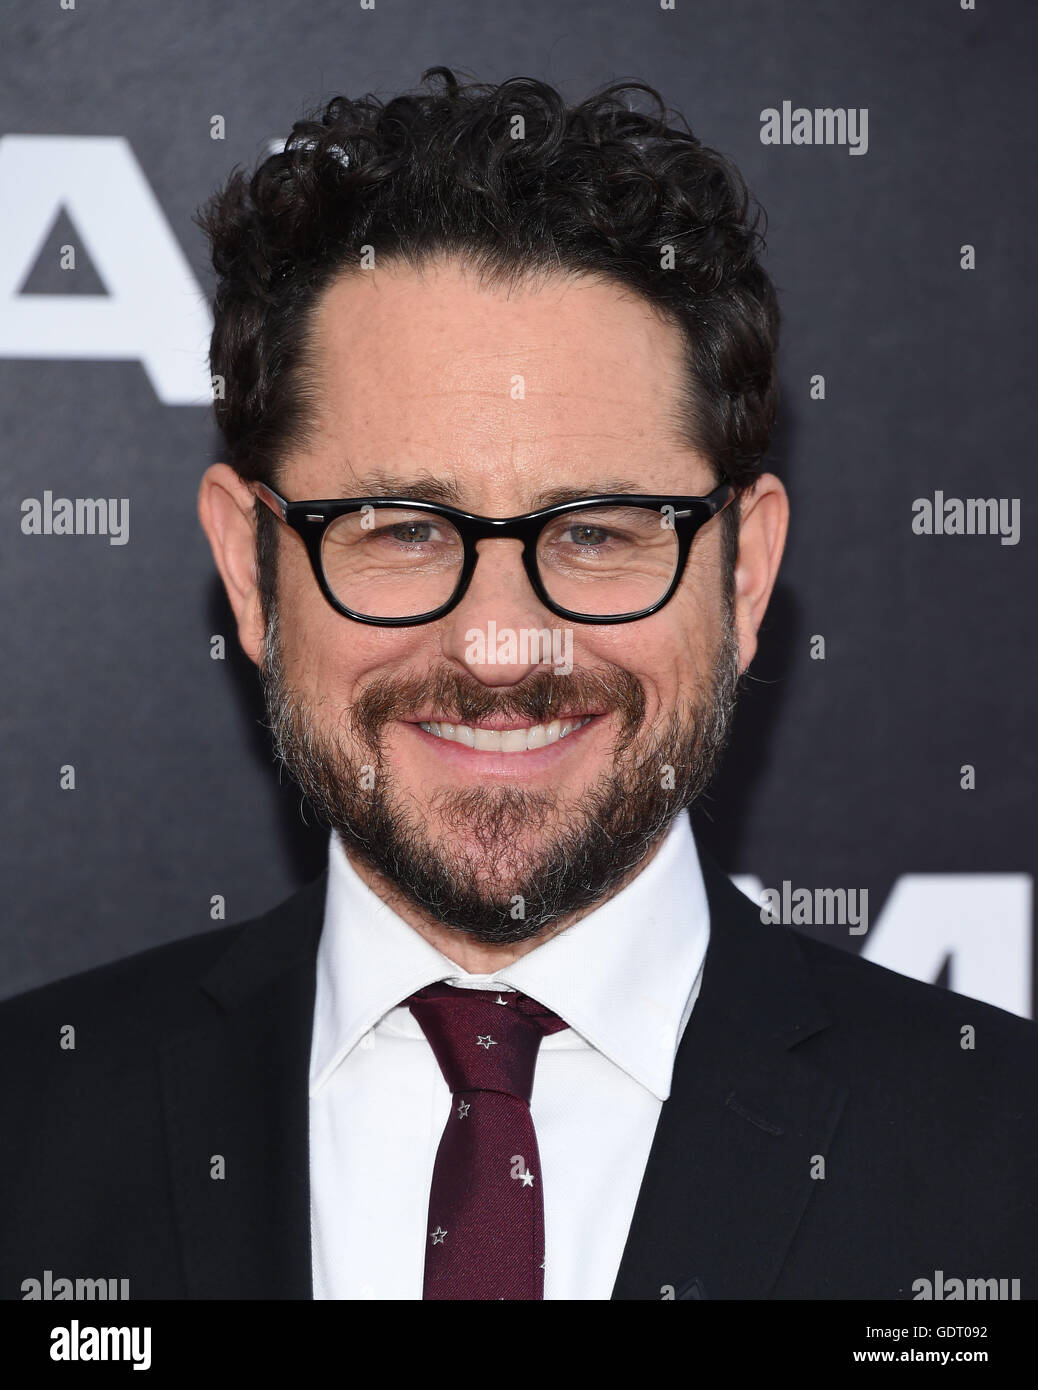 San Diego, California, USA. 20th July, 2016. J.J. Abrams arrives for the premiere of the film 'Star Trek Beyond' at the Embarcadero Marina Park. Credit:  Lisa O'Connor/ZUMA Wire/Alamy Live News Stock Photo